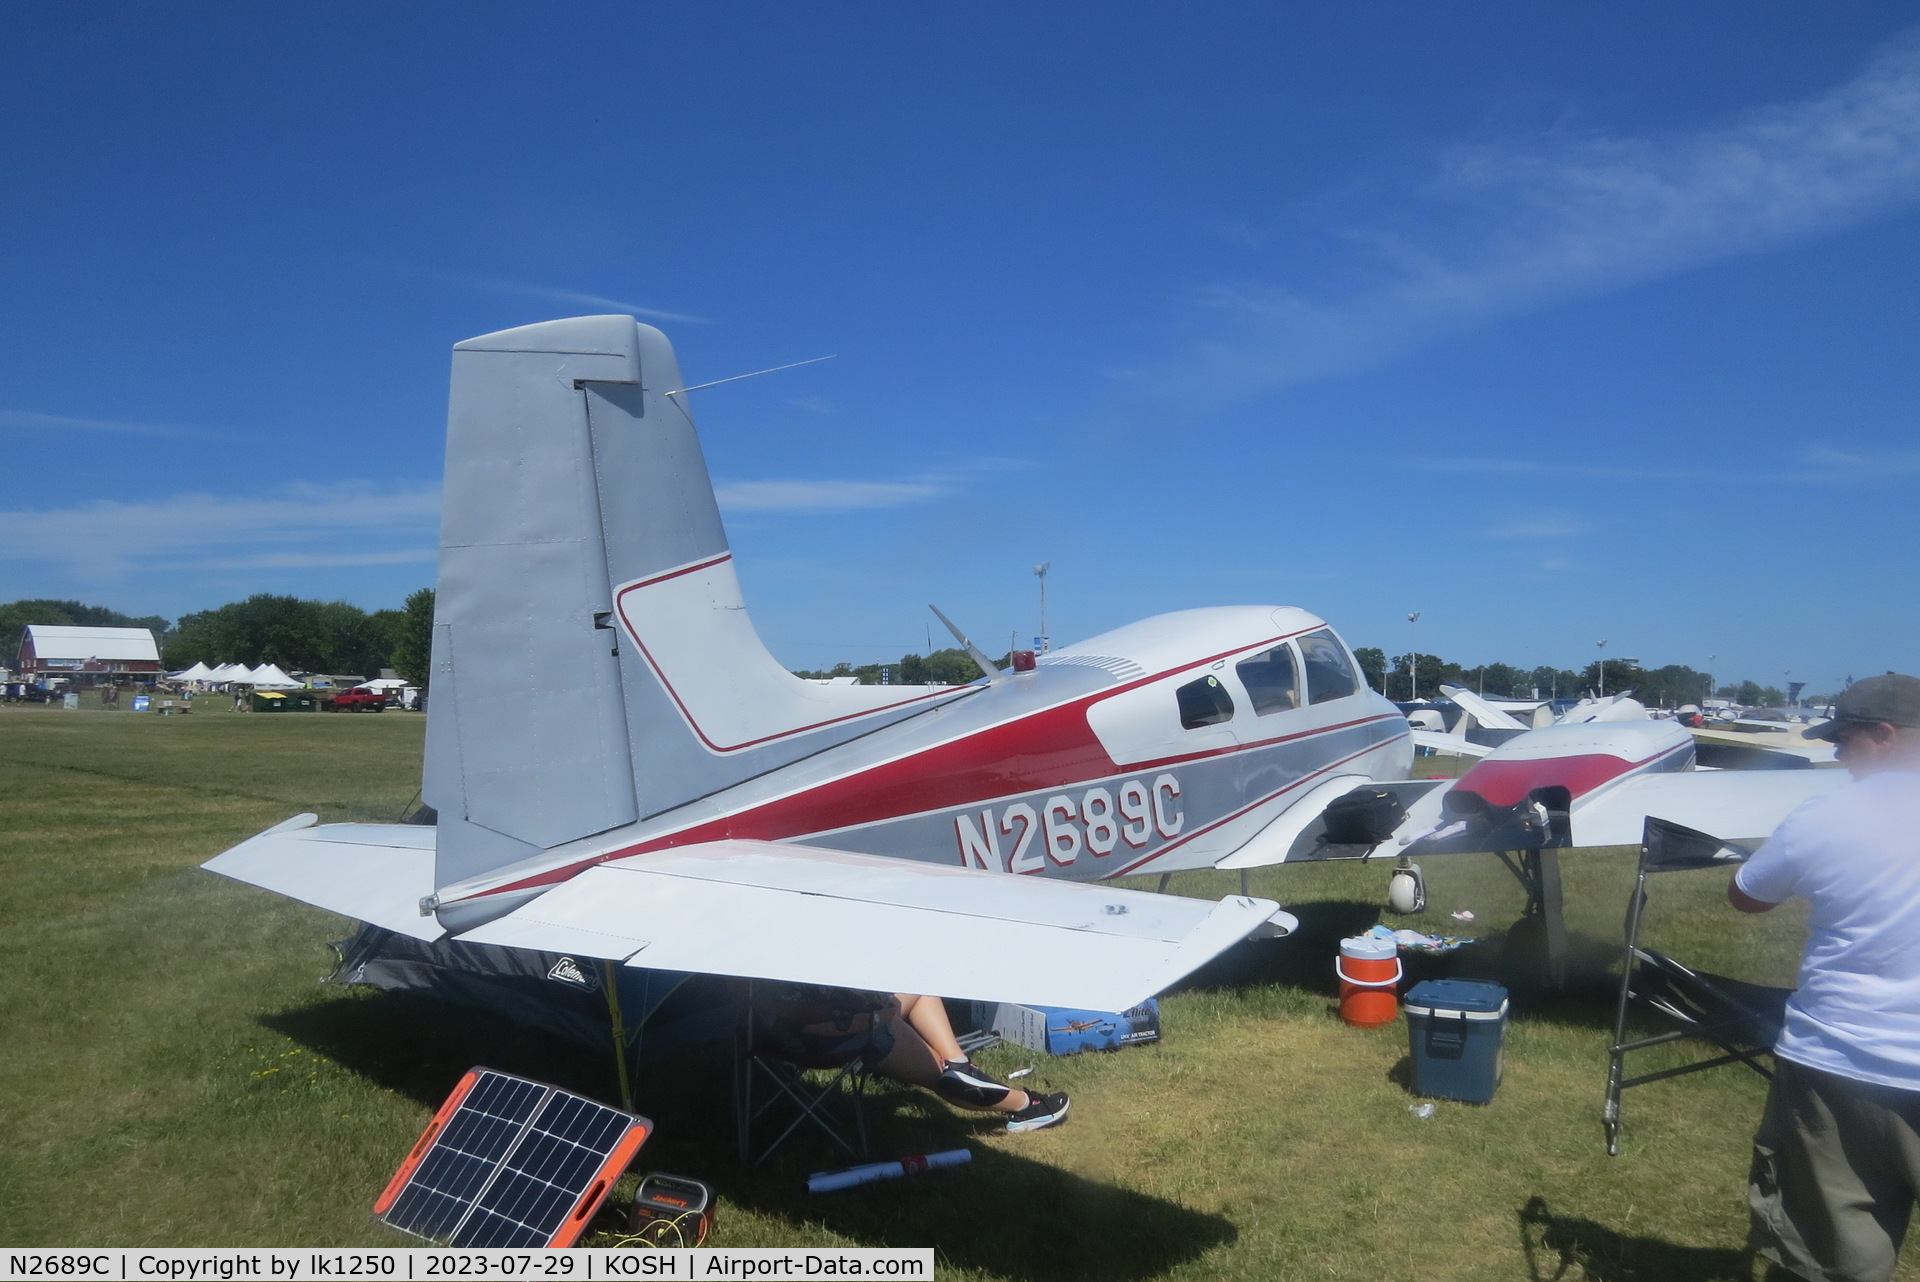 N2689C, 1955 Cessna 310 C/N 35089, This Cessna 310 was at EAA AirVenture 2023